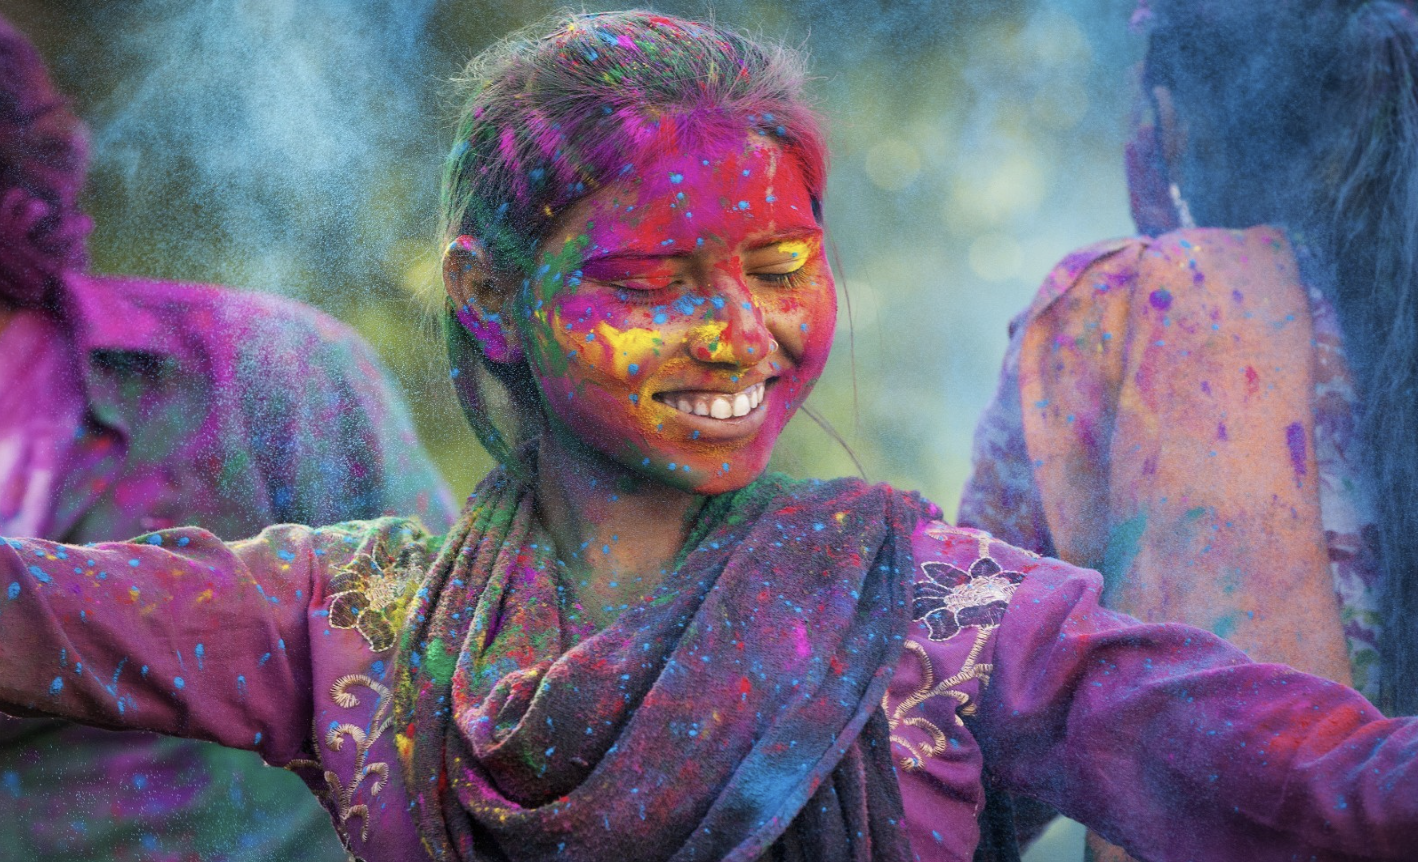 joyful person covered in color dust in celebration